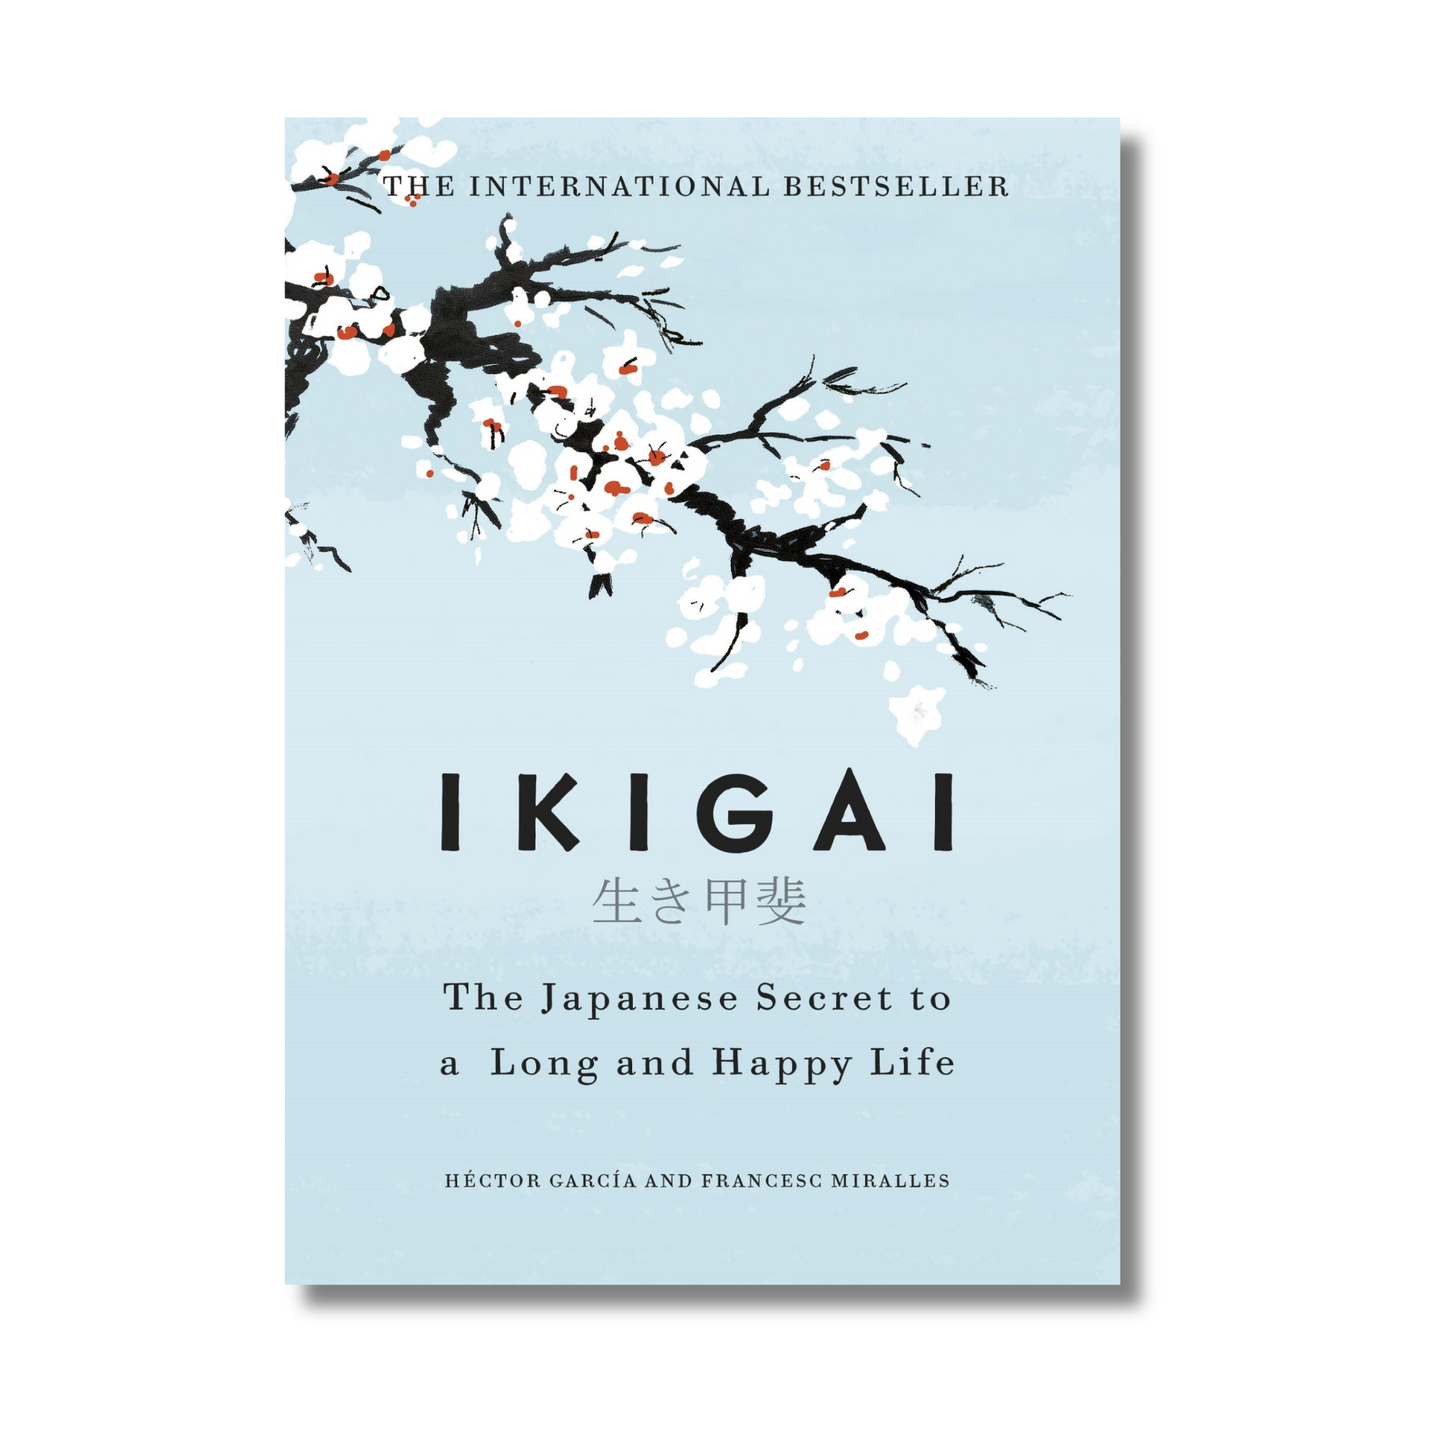 (Hardcover) Ikigai: The Japanese secret to a long and happy life by Héctor García